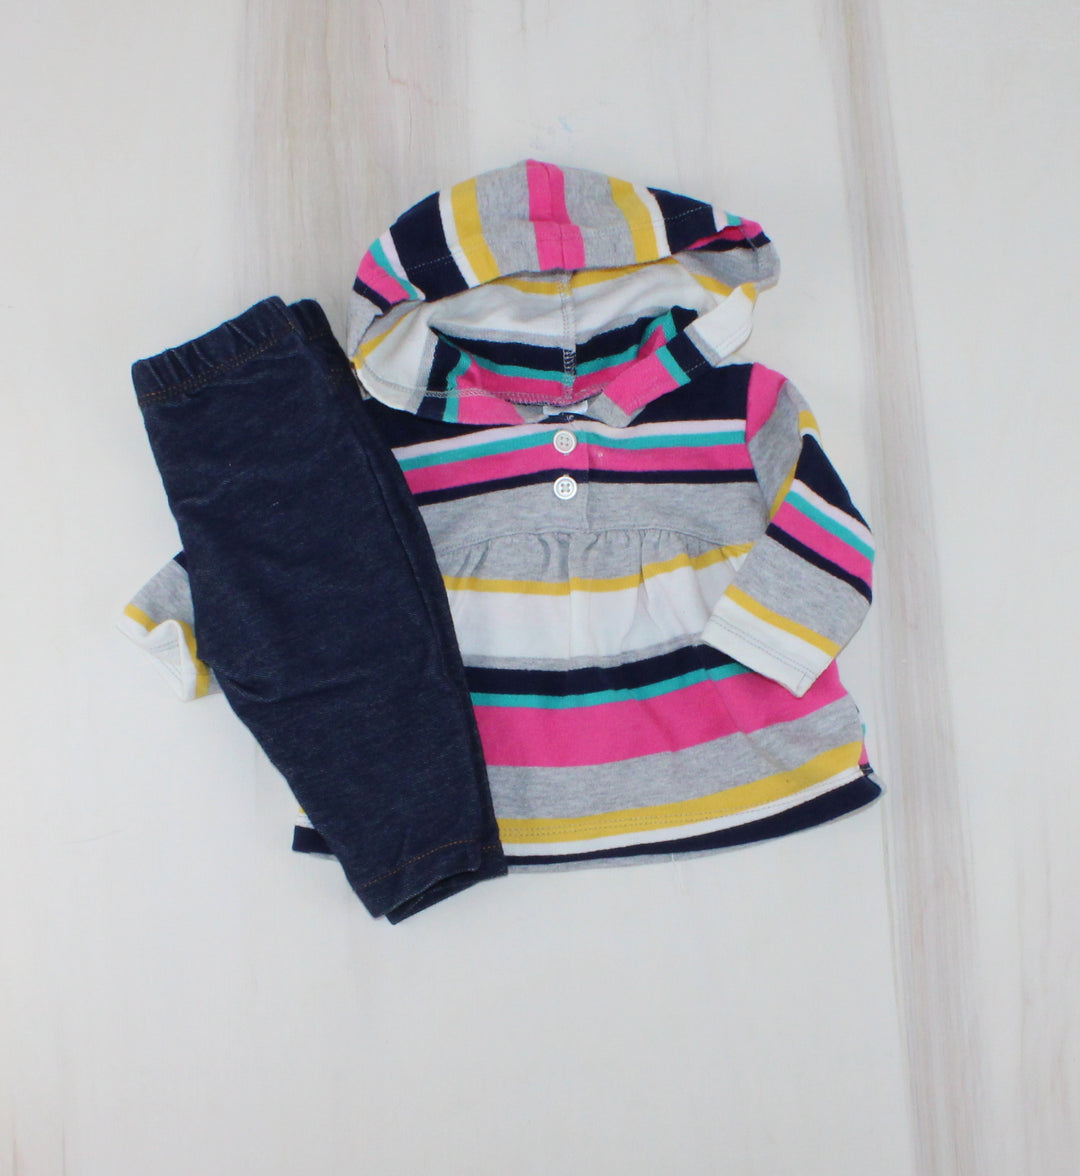 CARTERS STRIPED HOODED TOP & JEAN OUTFIT 3M EUC